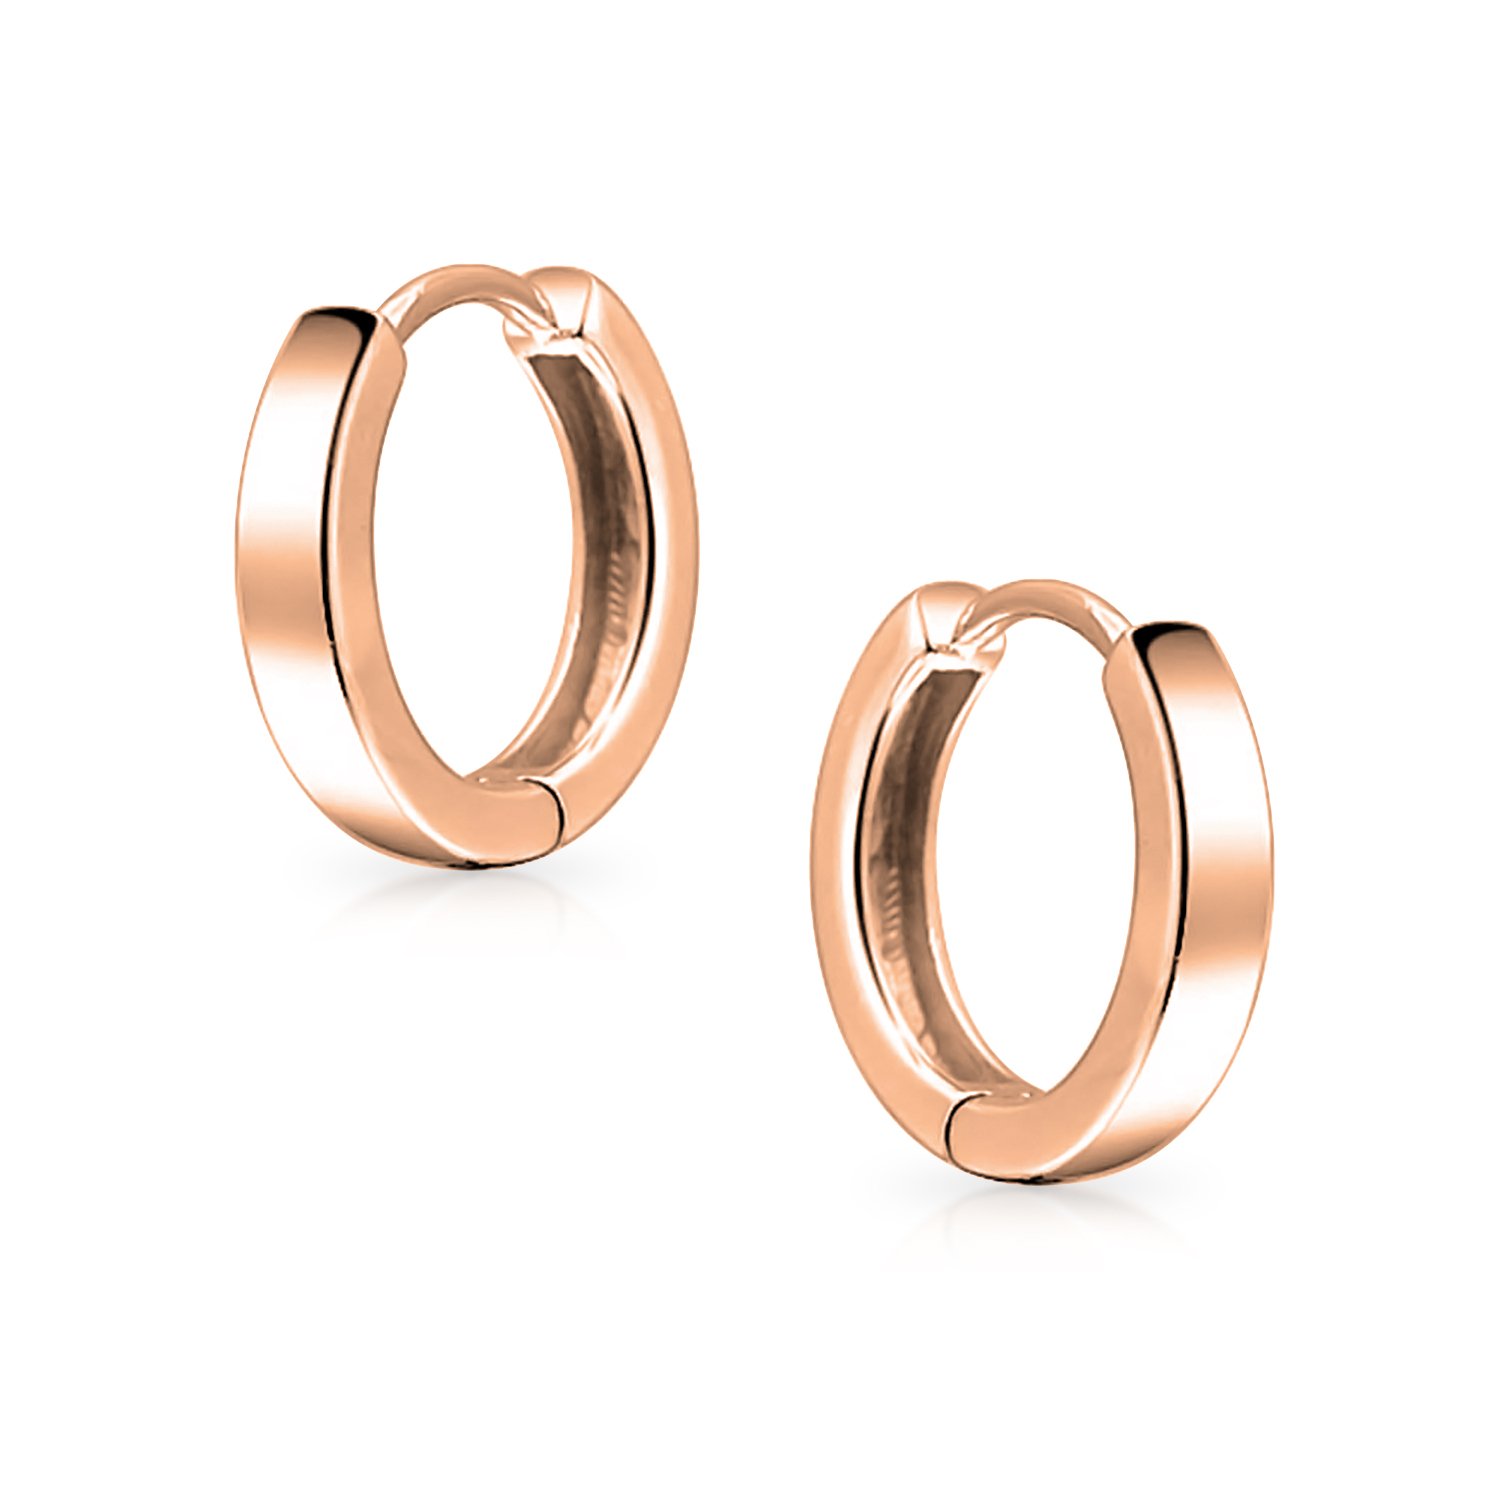 Basic Simple Thin Huggie Hoop Kpop Earrings For Women For Men Rose Gold Plated 925 Sterling Silver Polished Flat Hinge